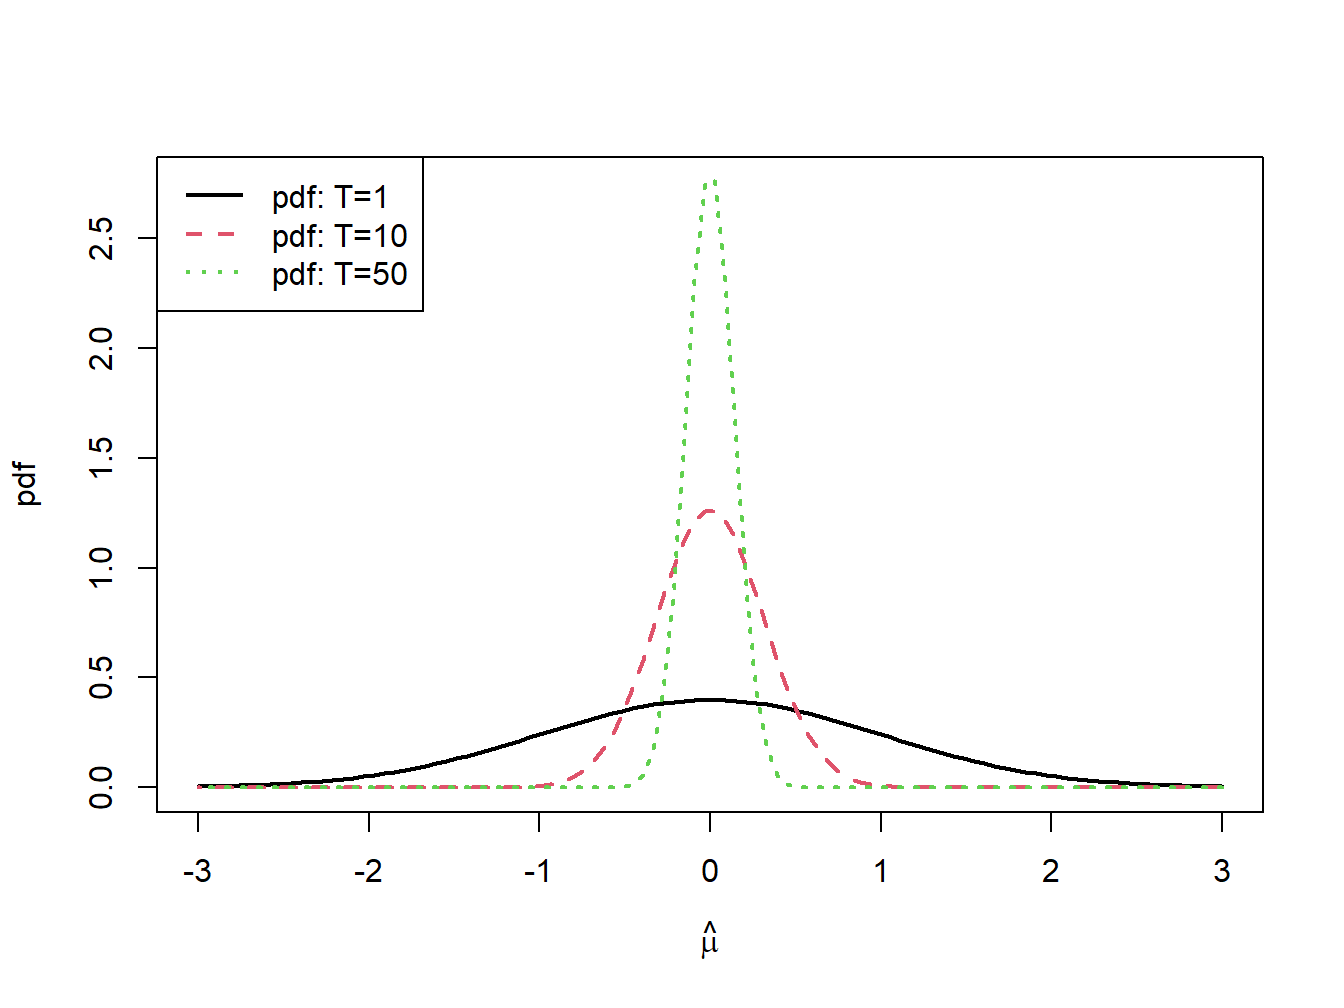 $N(0,1/T)$ sampling distributions for $\hat{\mu}$ for $T=1,10$ and $50$.